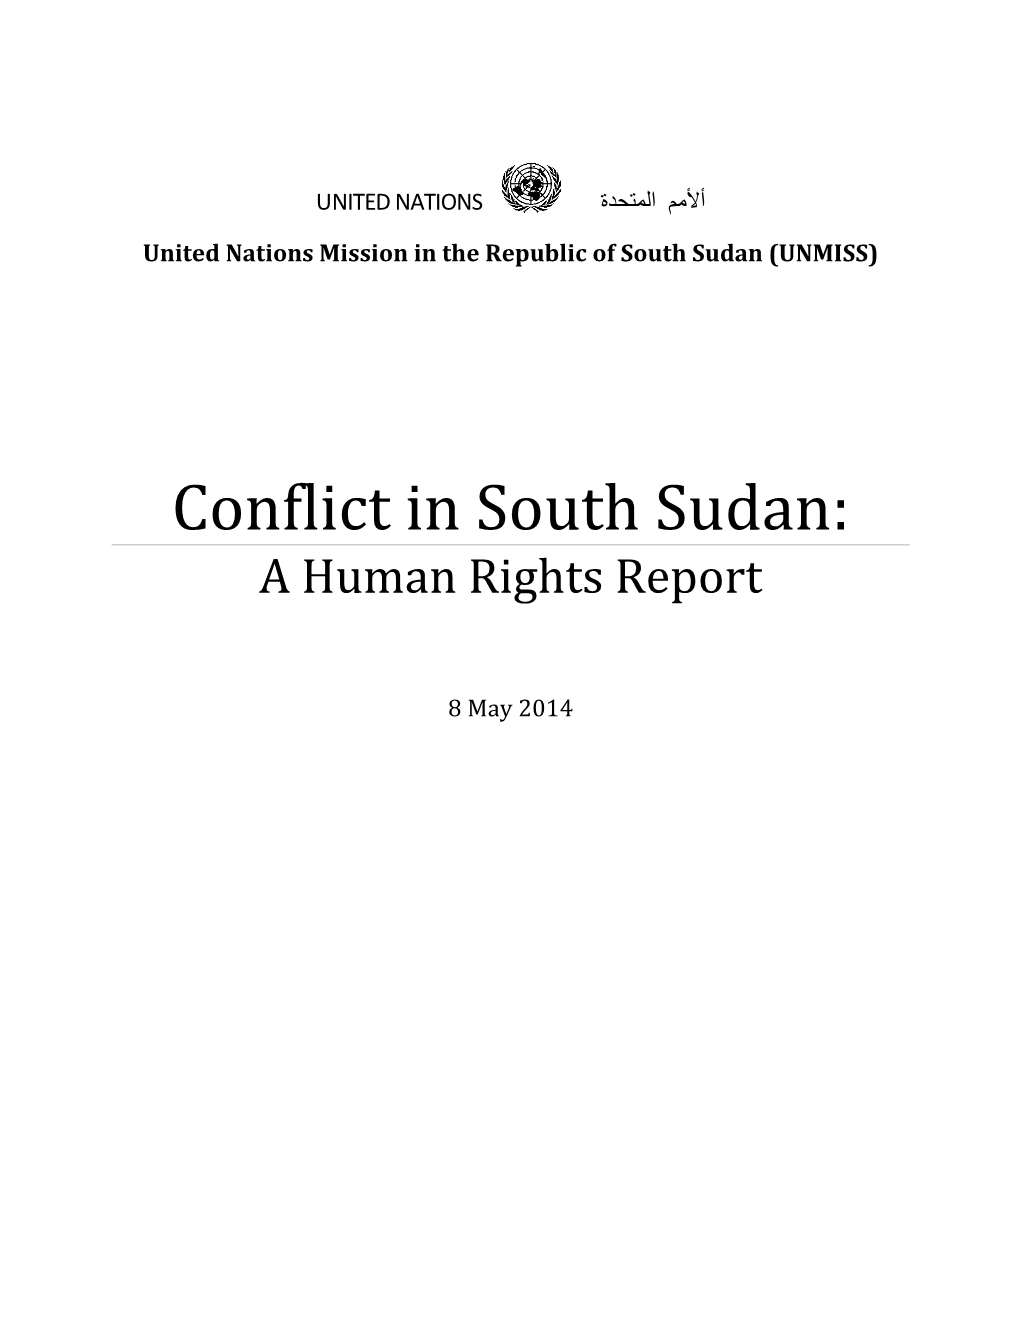 Conflict in South Sudan: a Human Rights Report